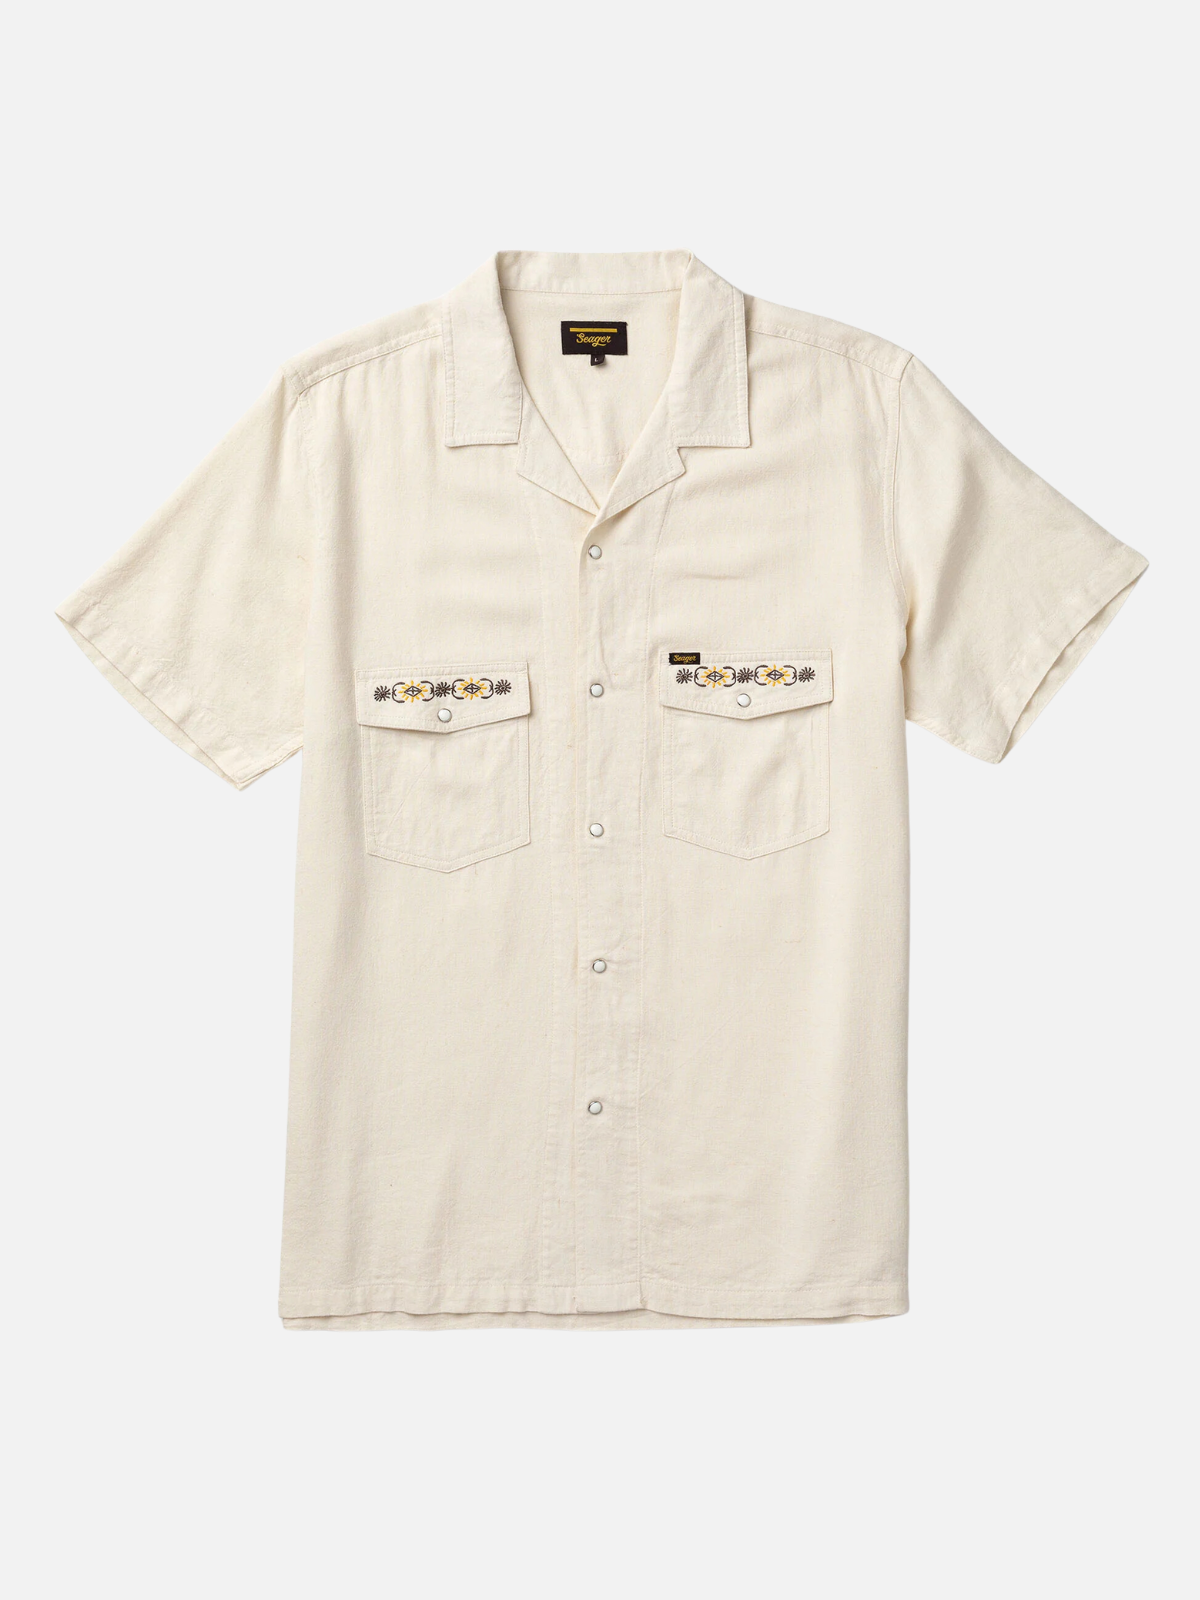 seager whippersnapper ss short sleeve shirt natural cream pearl snap button down viscose linen blend camp collar kempt athens ga georgia men's clothing store